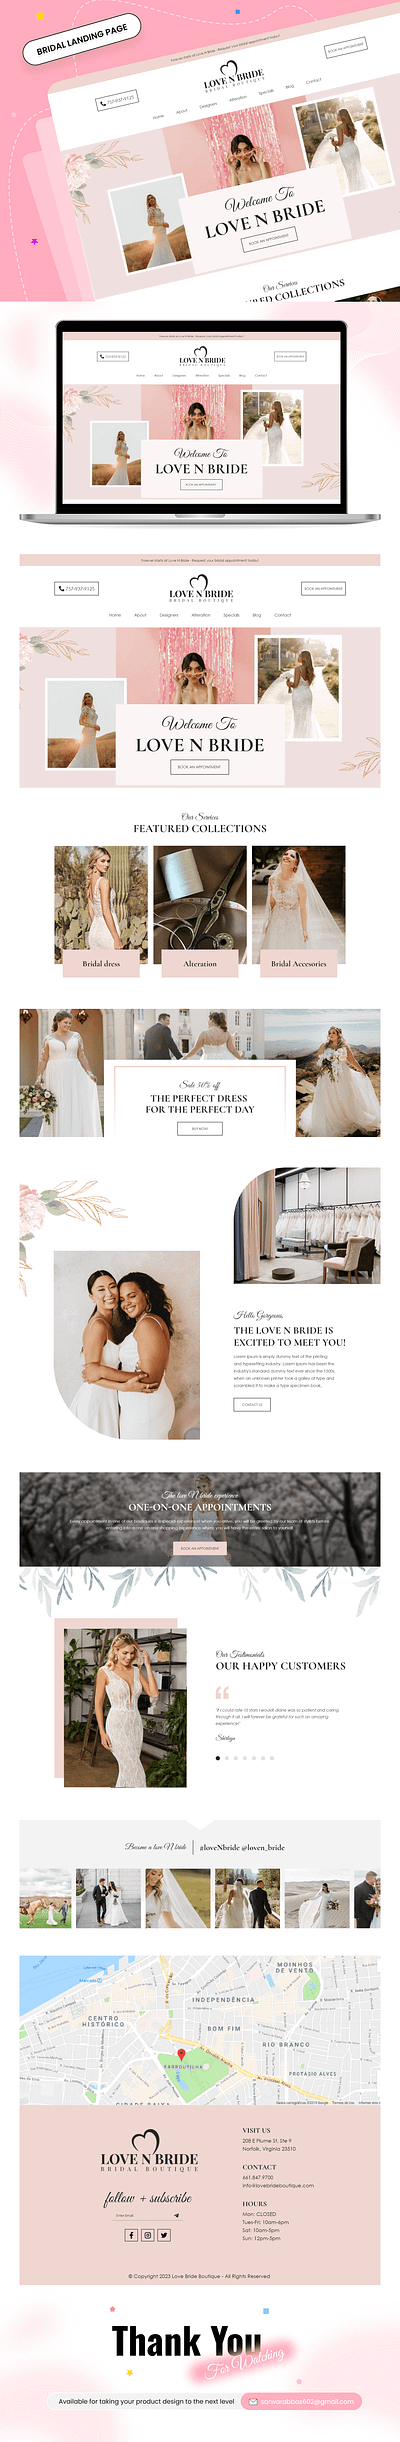 Bridal landing page alteration landing page appointments landing page beauty landing page boutique bridal accessories bridal boutique landing page bridal dress landing page bridal landing page bridal shopping landing page creative design dress engagements love parlor landing page queens sale special day uiux website